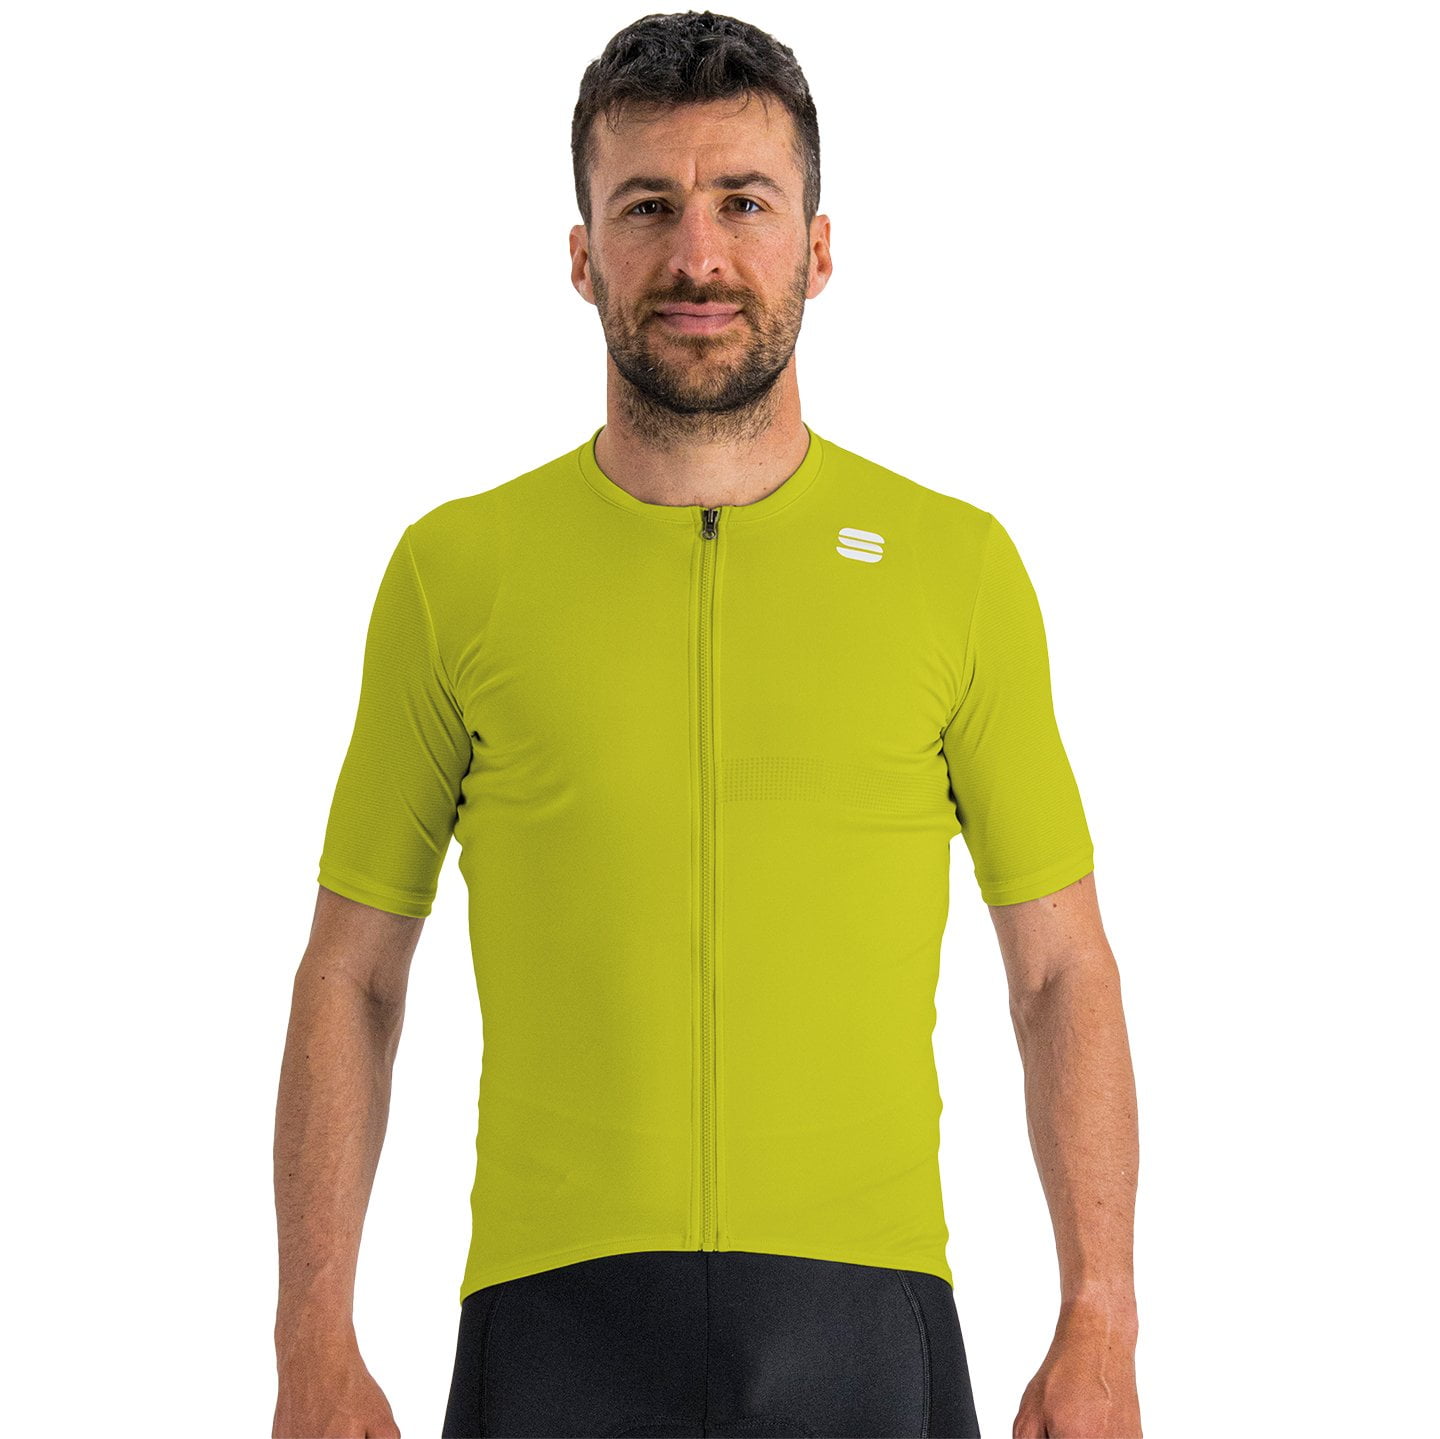 SPORTFUL Matchy Short Sleeve Jersey Short Sleeve Jersey, for men, size 2XL, Cycling jersey, Cycle clothing